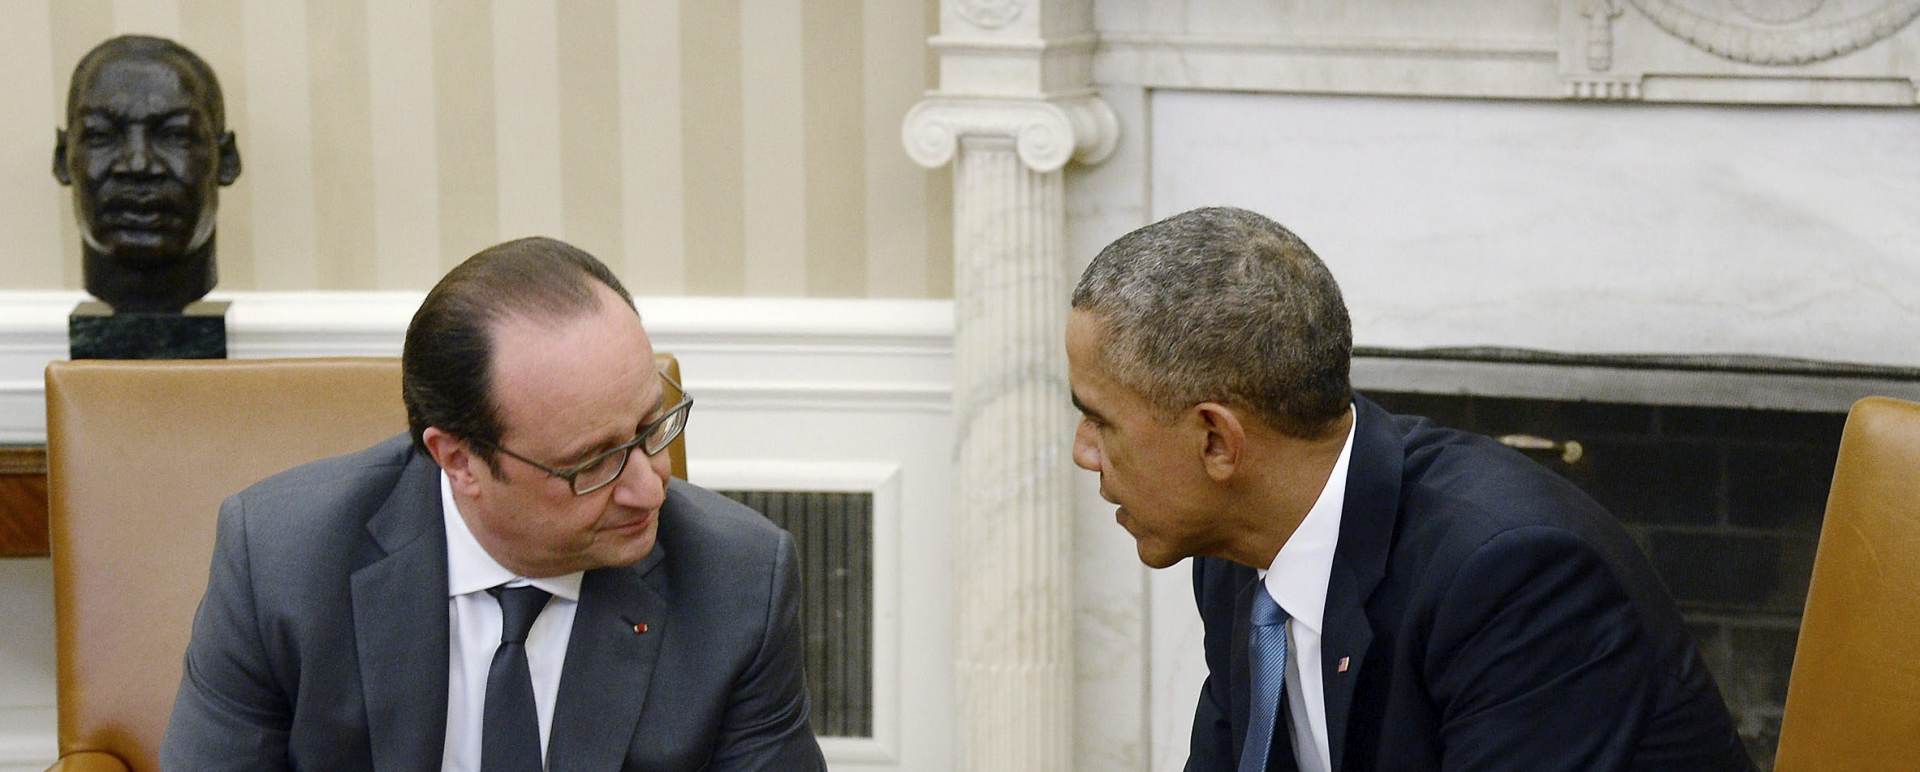 epa05039939 French President Francois Hollande (L) and US President Barack Obama (R) meet in the Oval Office of the White House in Washington, DC, USA, 24 November 2015. This is the first time than the two leaders meet since the 13 November terrorist attacks in Paris.  EPA/OLIVIER DOULIERY / POOL